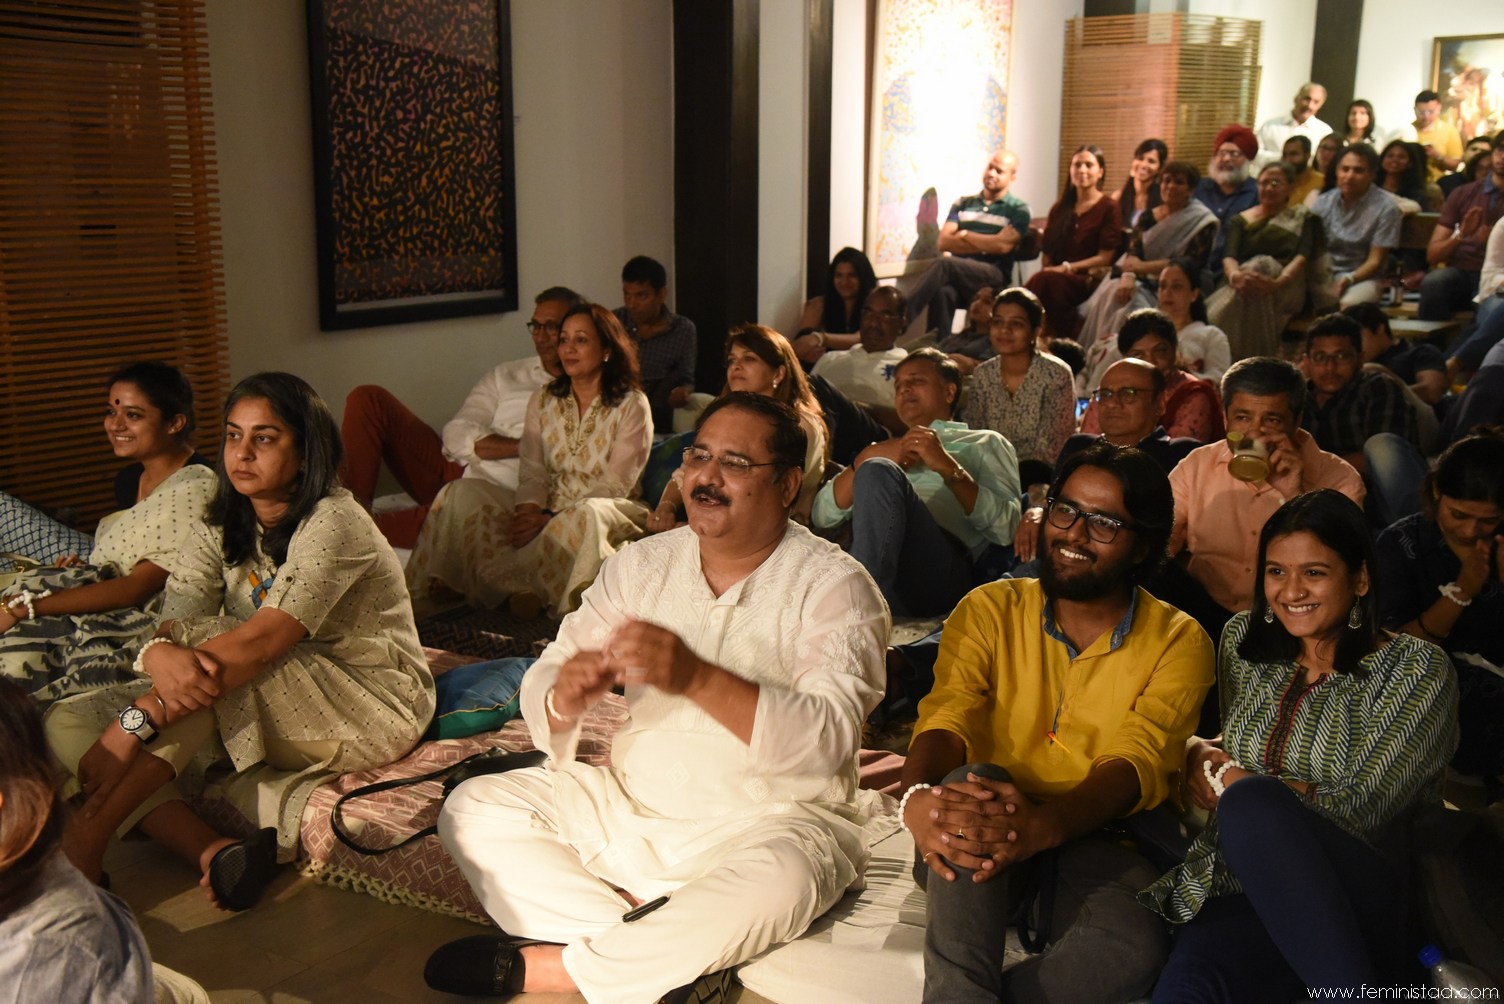 Season Finale of Under The Banyan Tree on a Full Moon Night Ends On a High Note